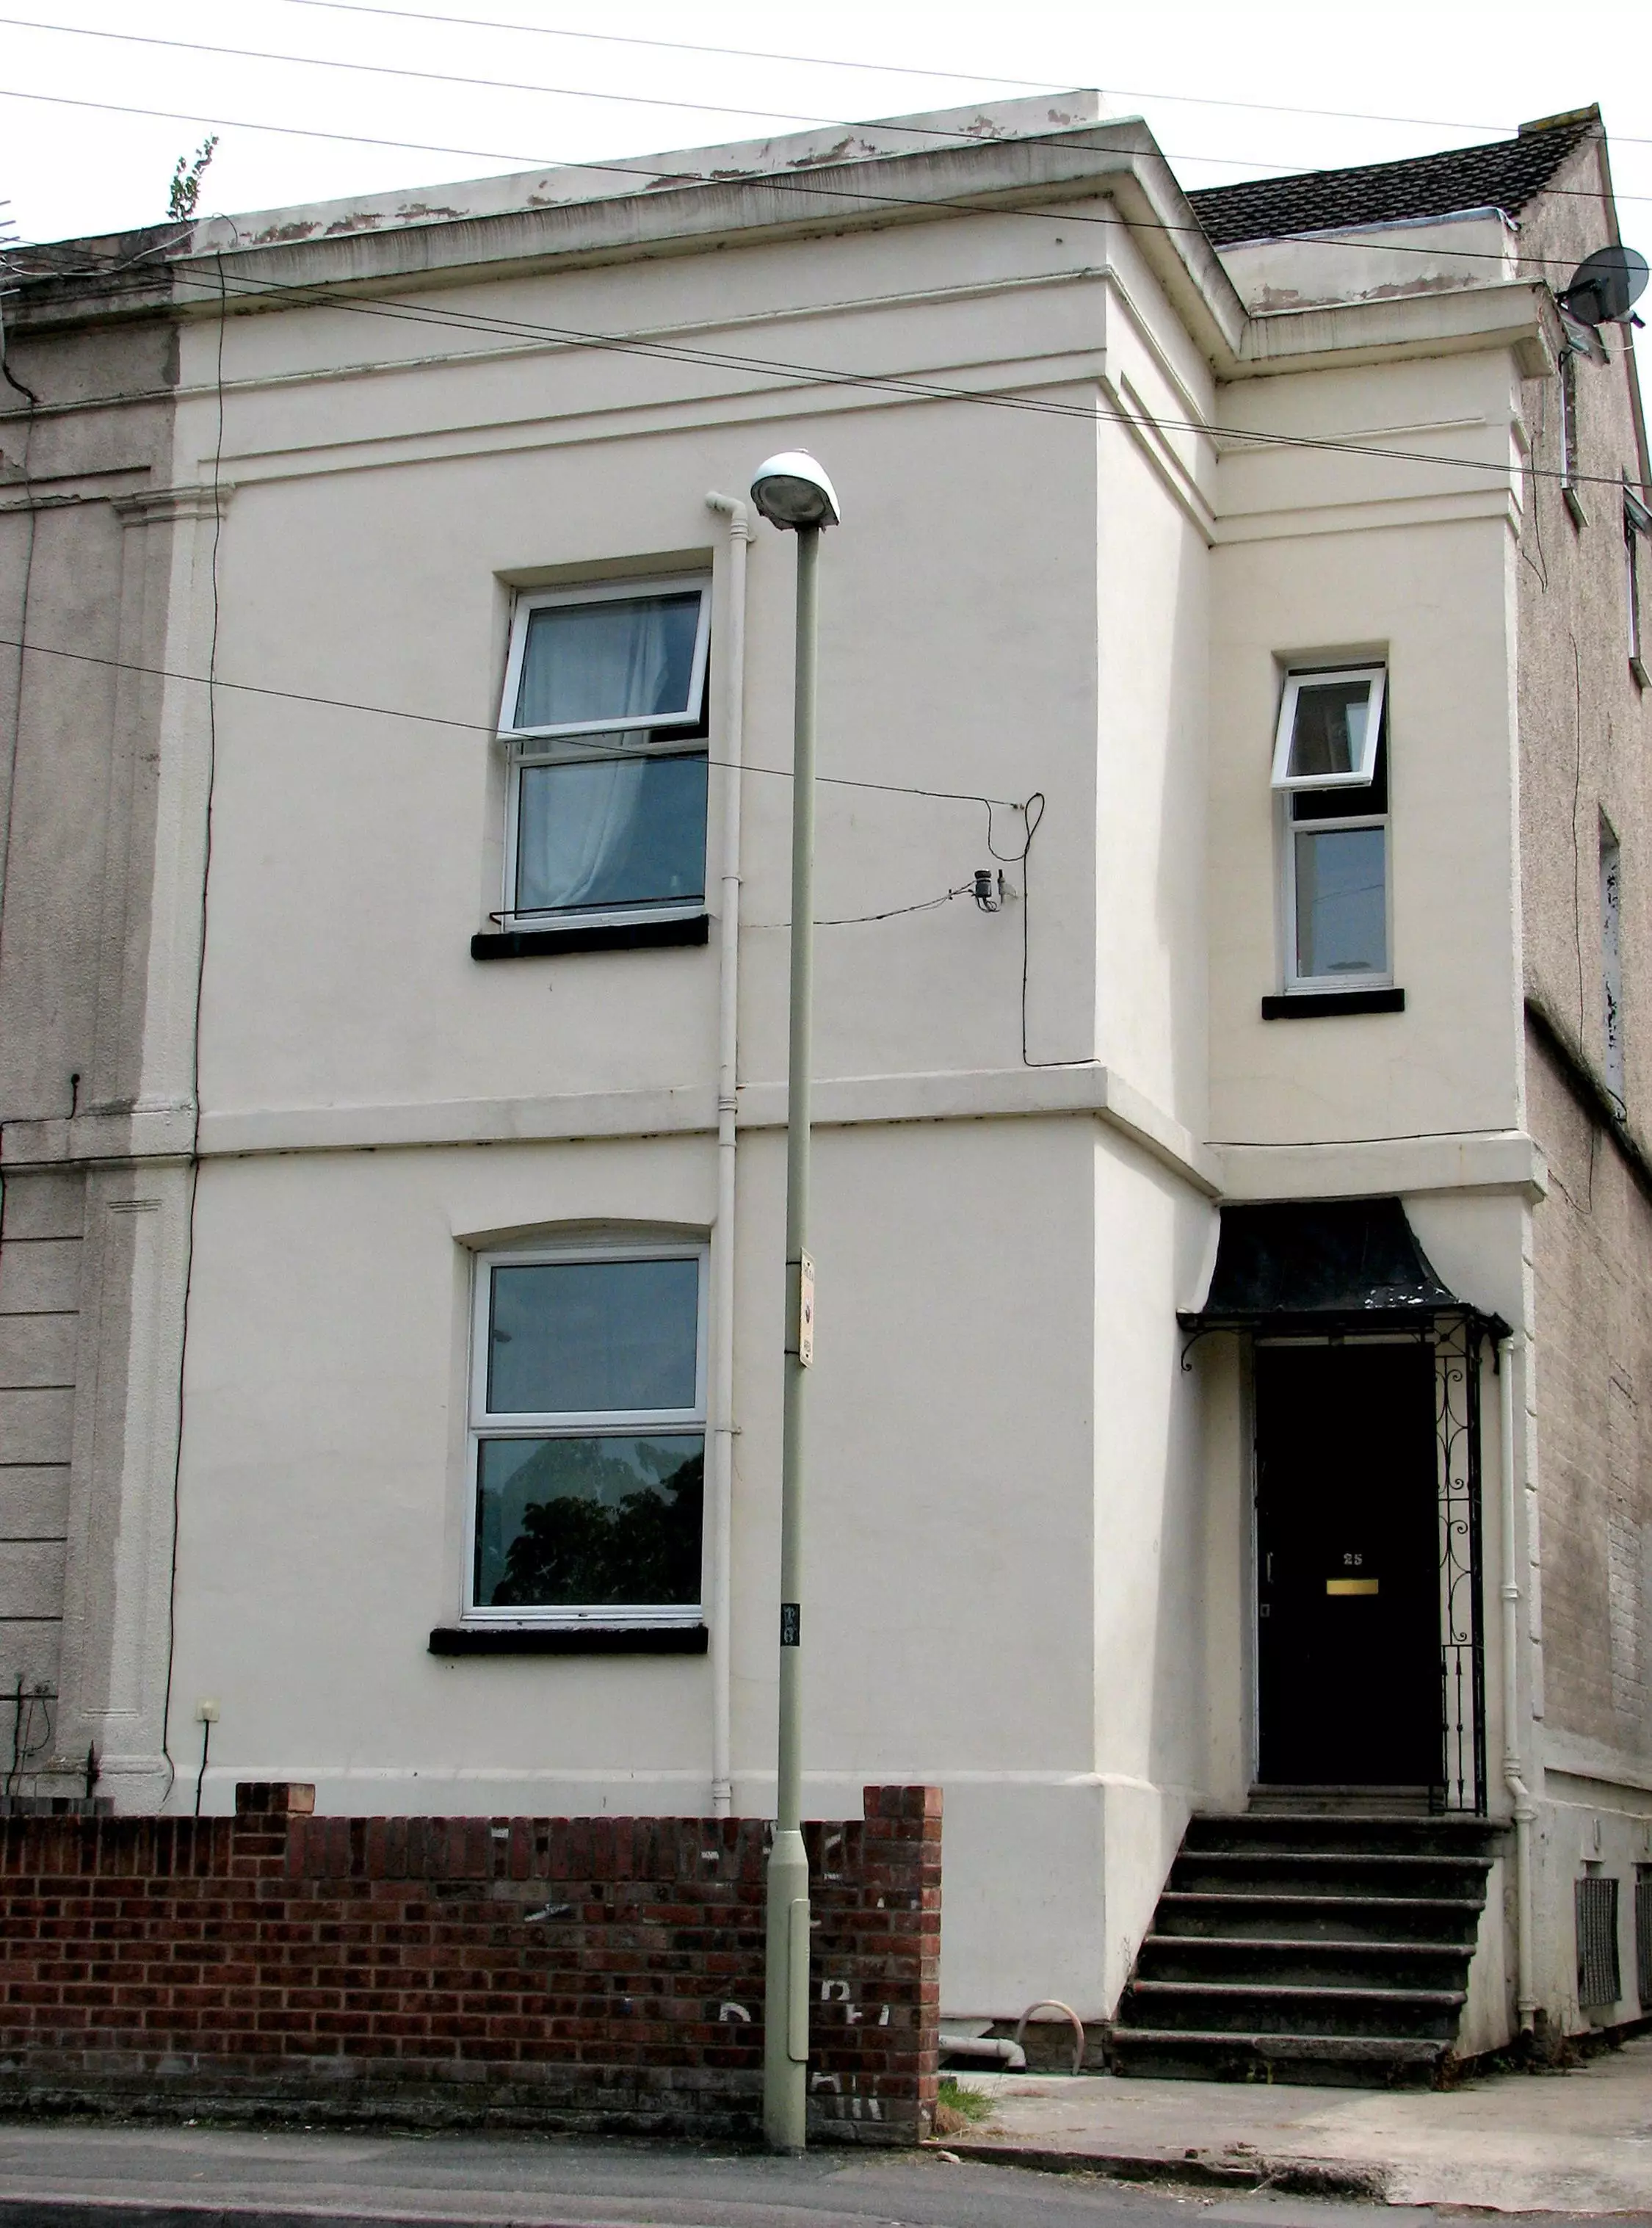 25 Cromwell Street is known as the house of horrors (